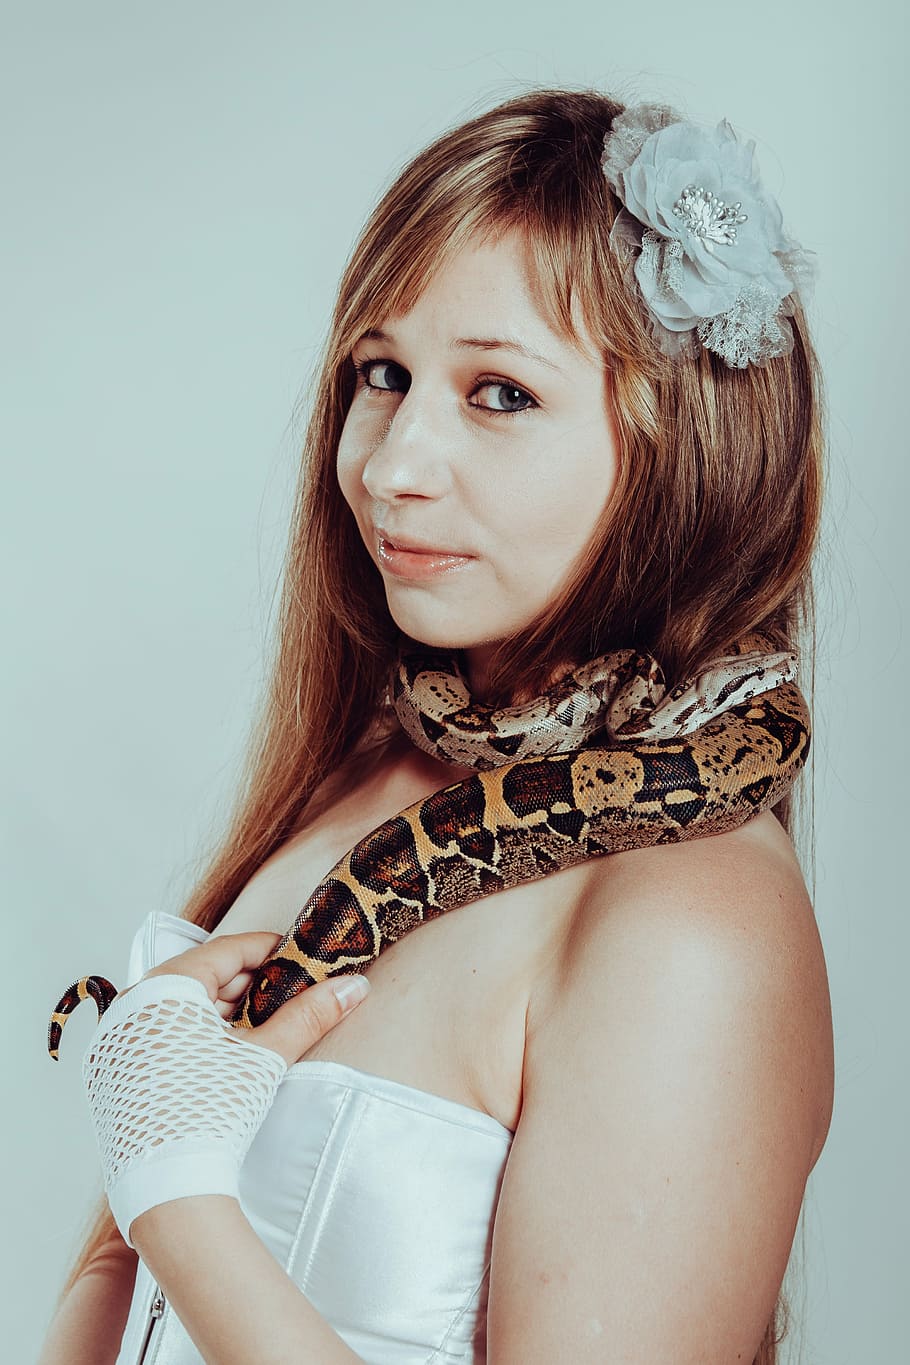 boa constrictor, snake, woman, with a snake, lovely, portrait, HD wallpaper